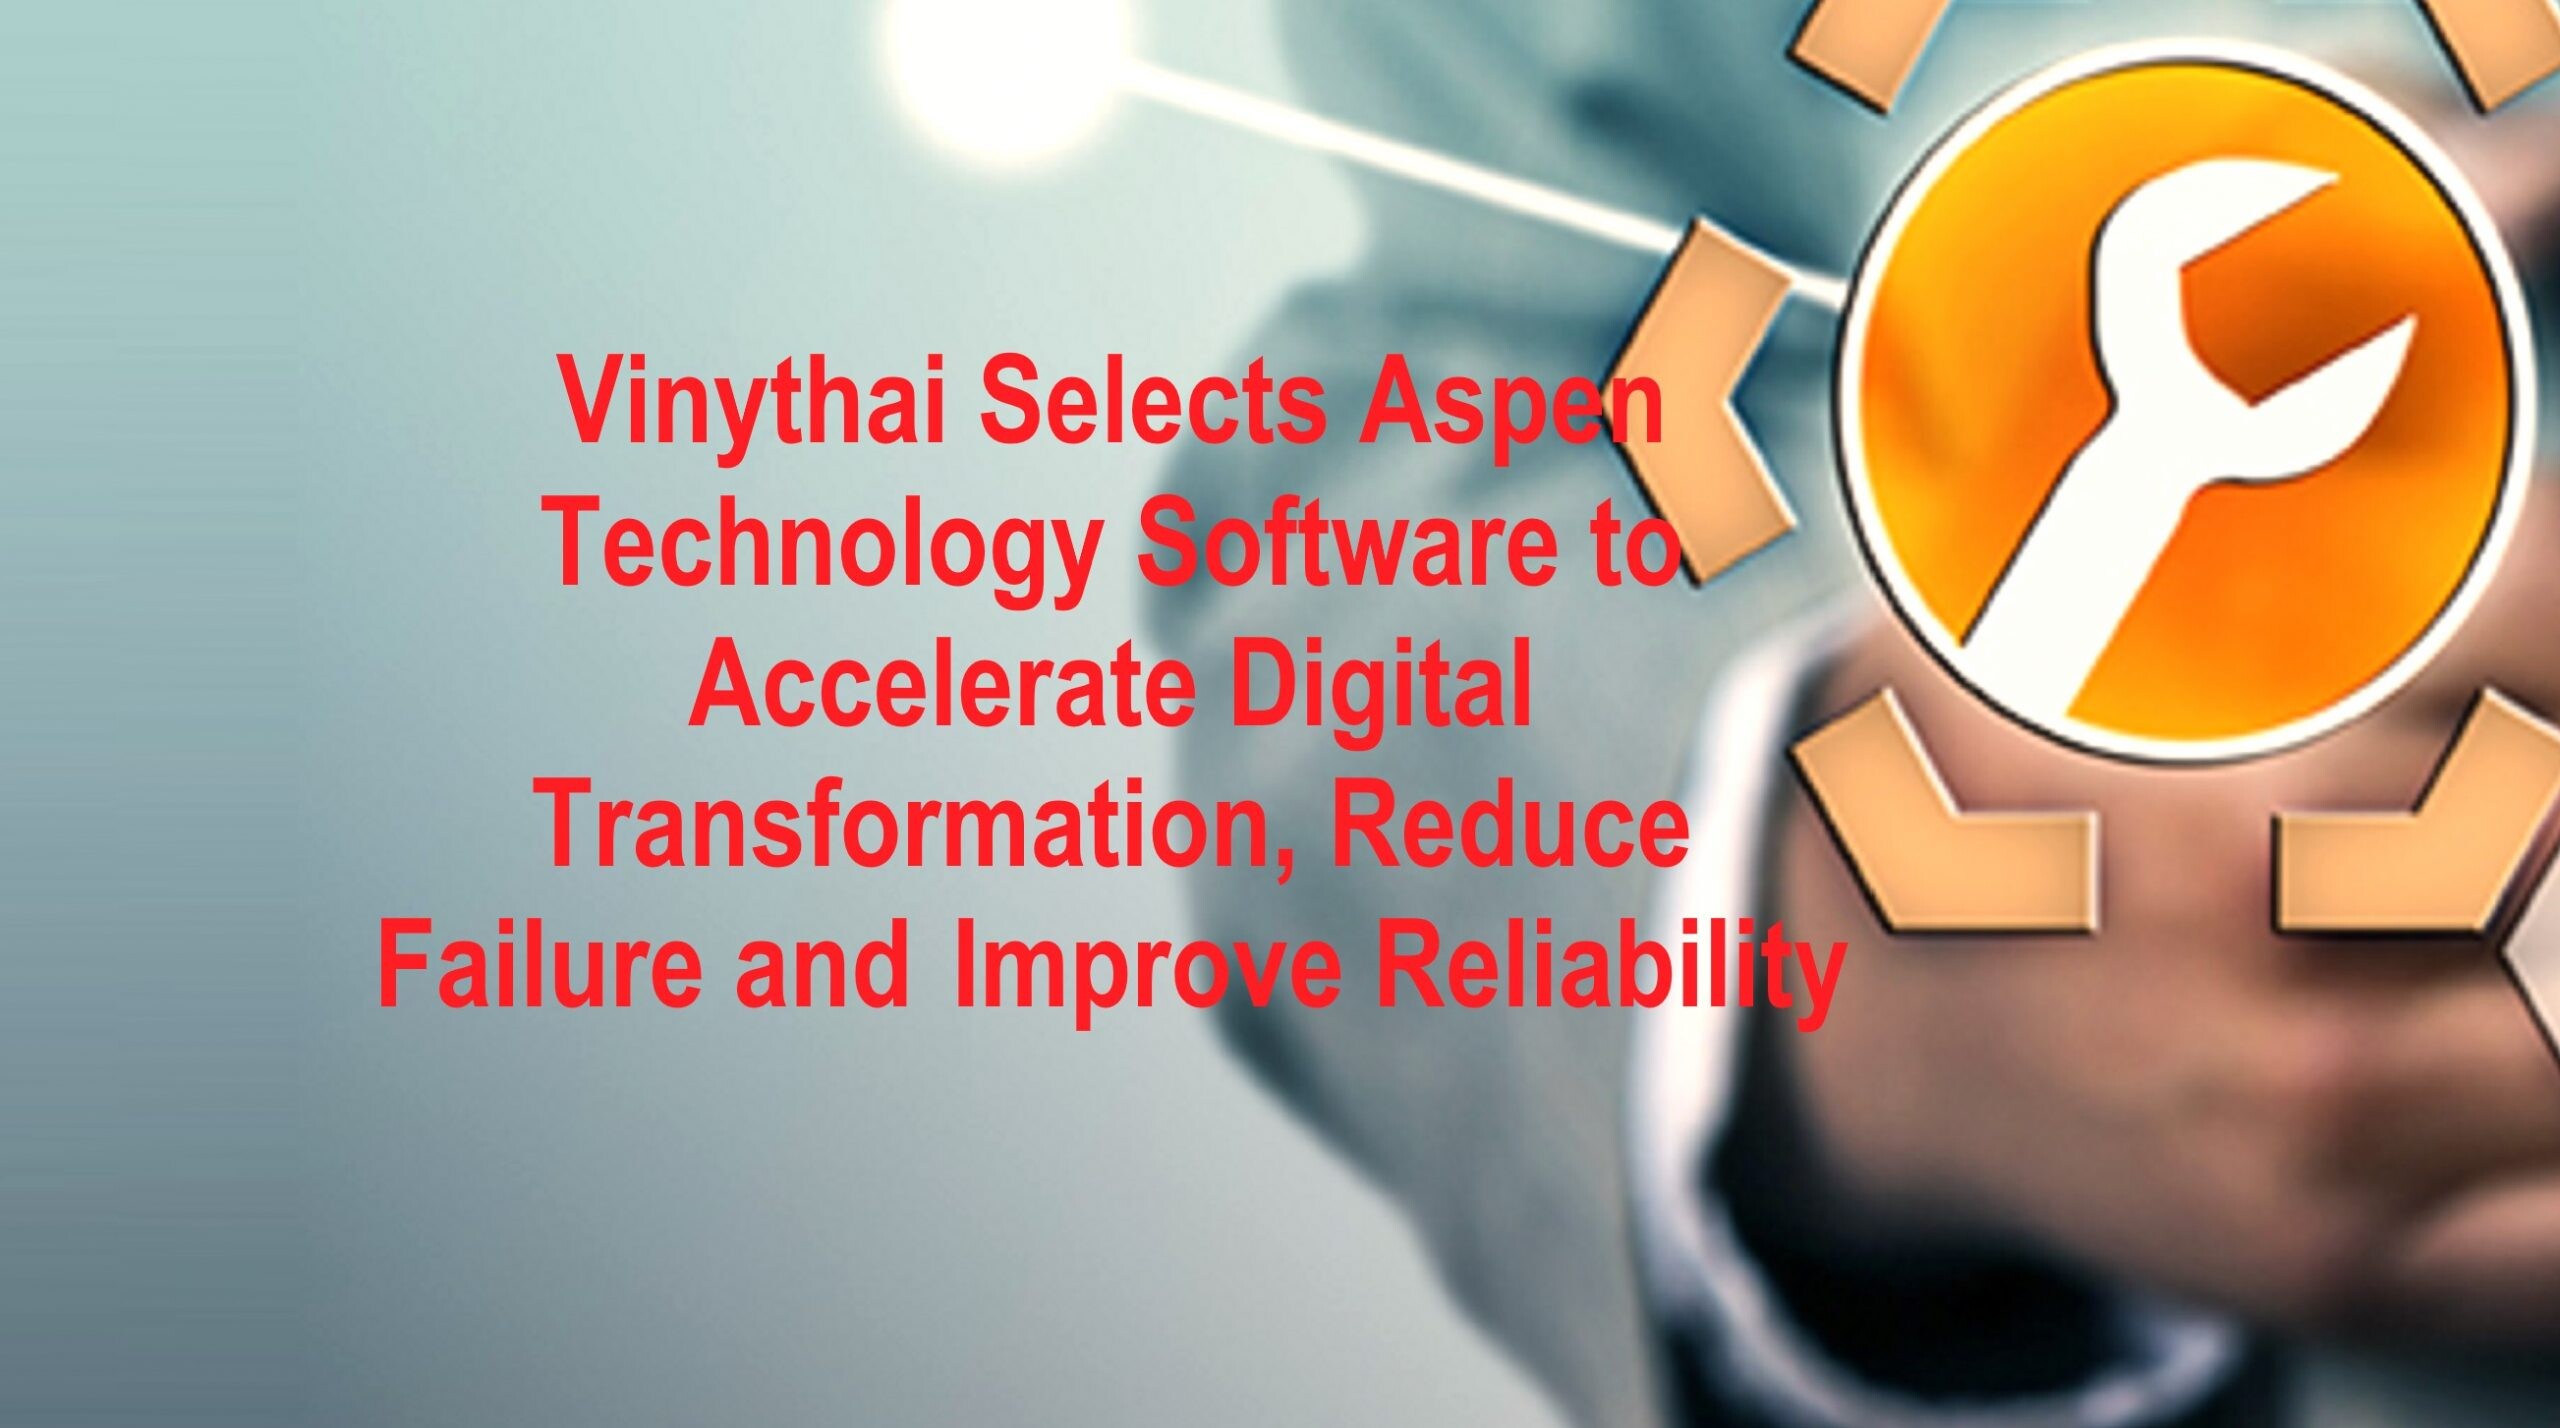 Vinythai Selects Aspen Technology Software to Accelerate Digital Transformation, Reduce Failure and Improve Reliability